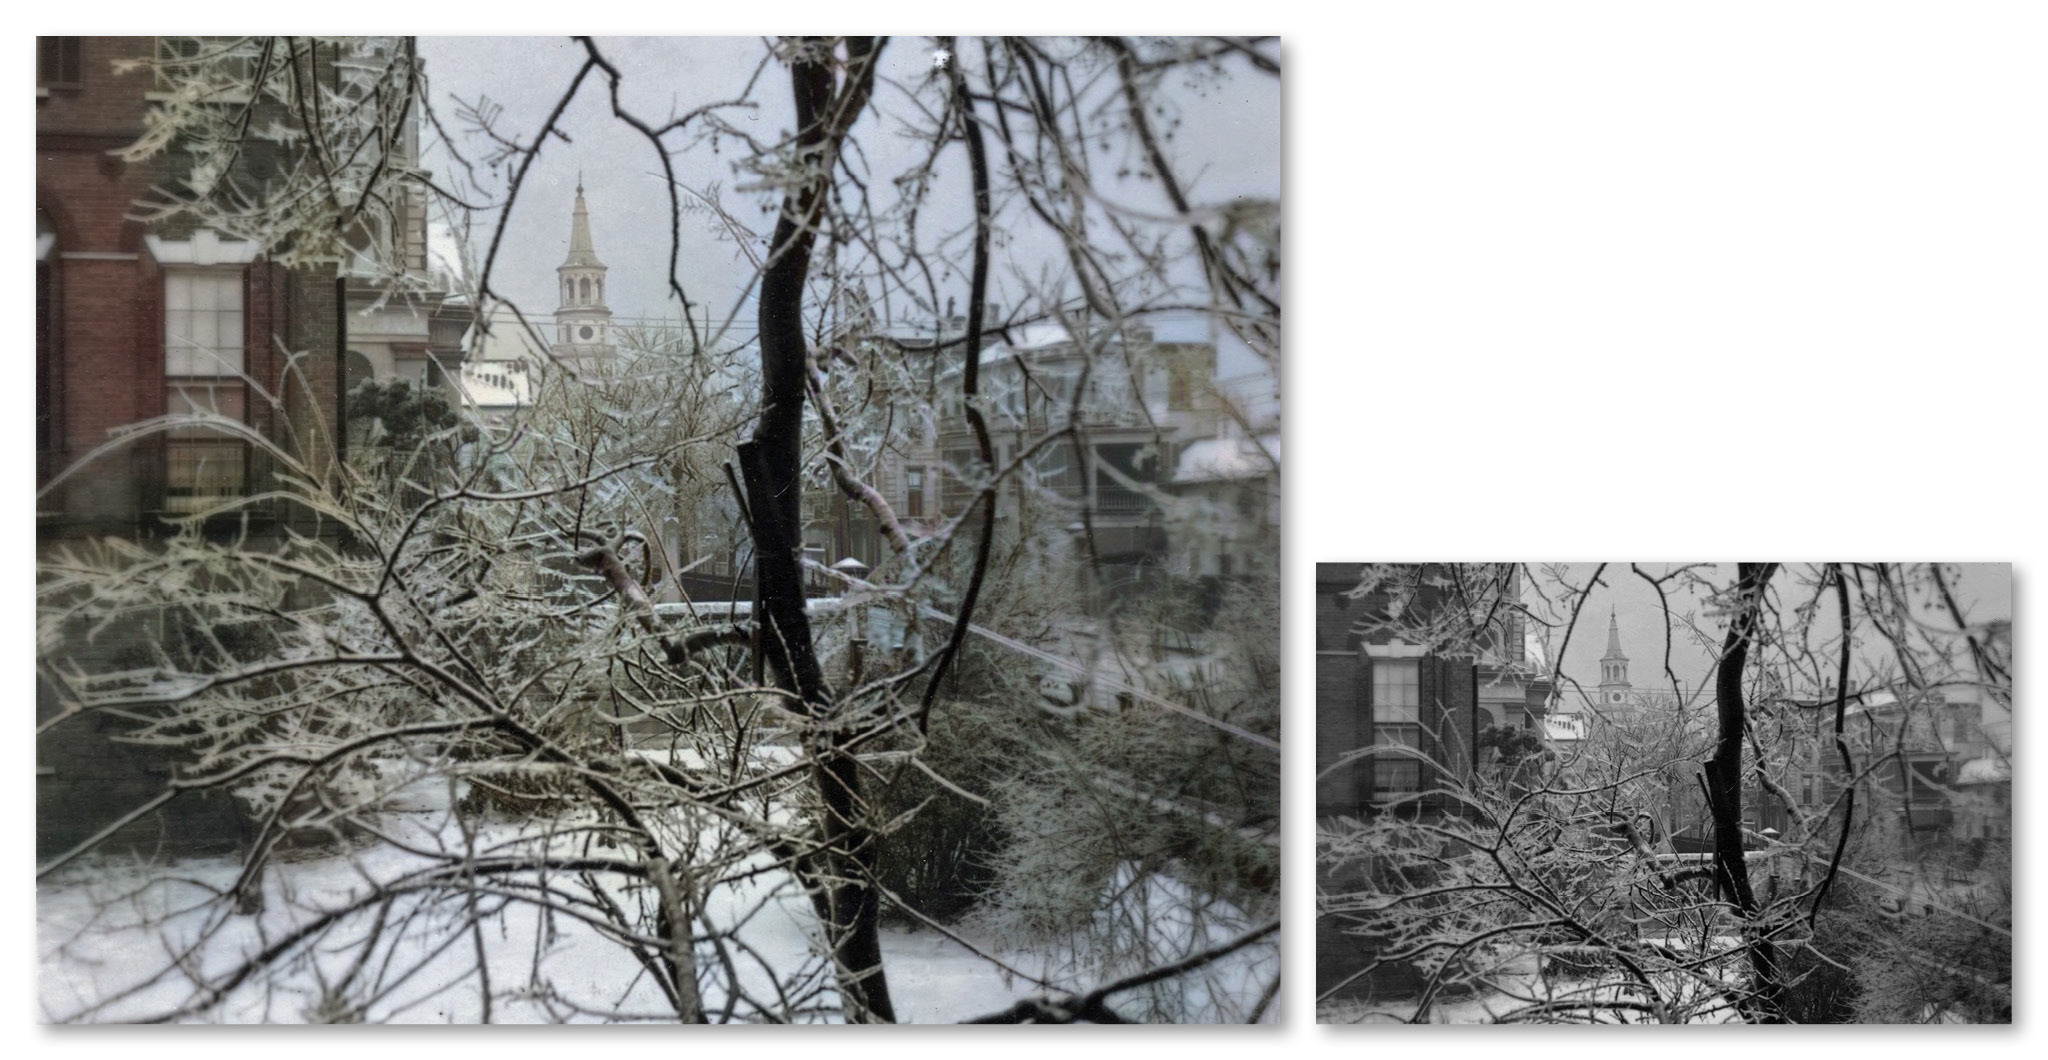 Icy Branches, undated <br> Morton Brailsford Paine, 1883-1940 <br> The steeple of St. Michael’s Episcopal Church is perfectly framed in the icy branches of a tree. Paine shot the image from a window at his house on 47 Meeting Street.